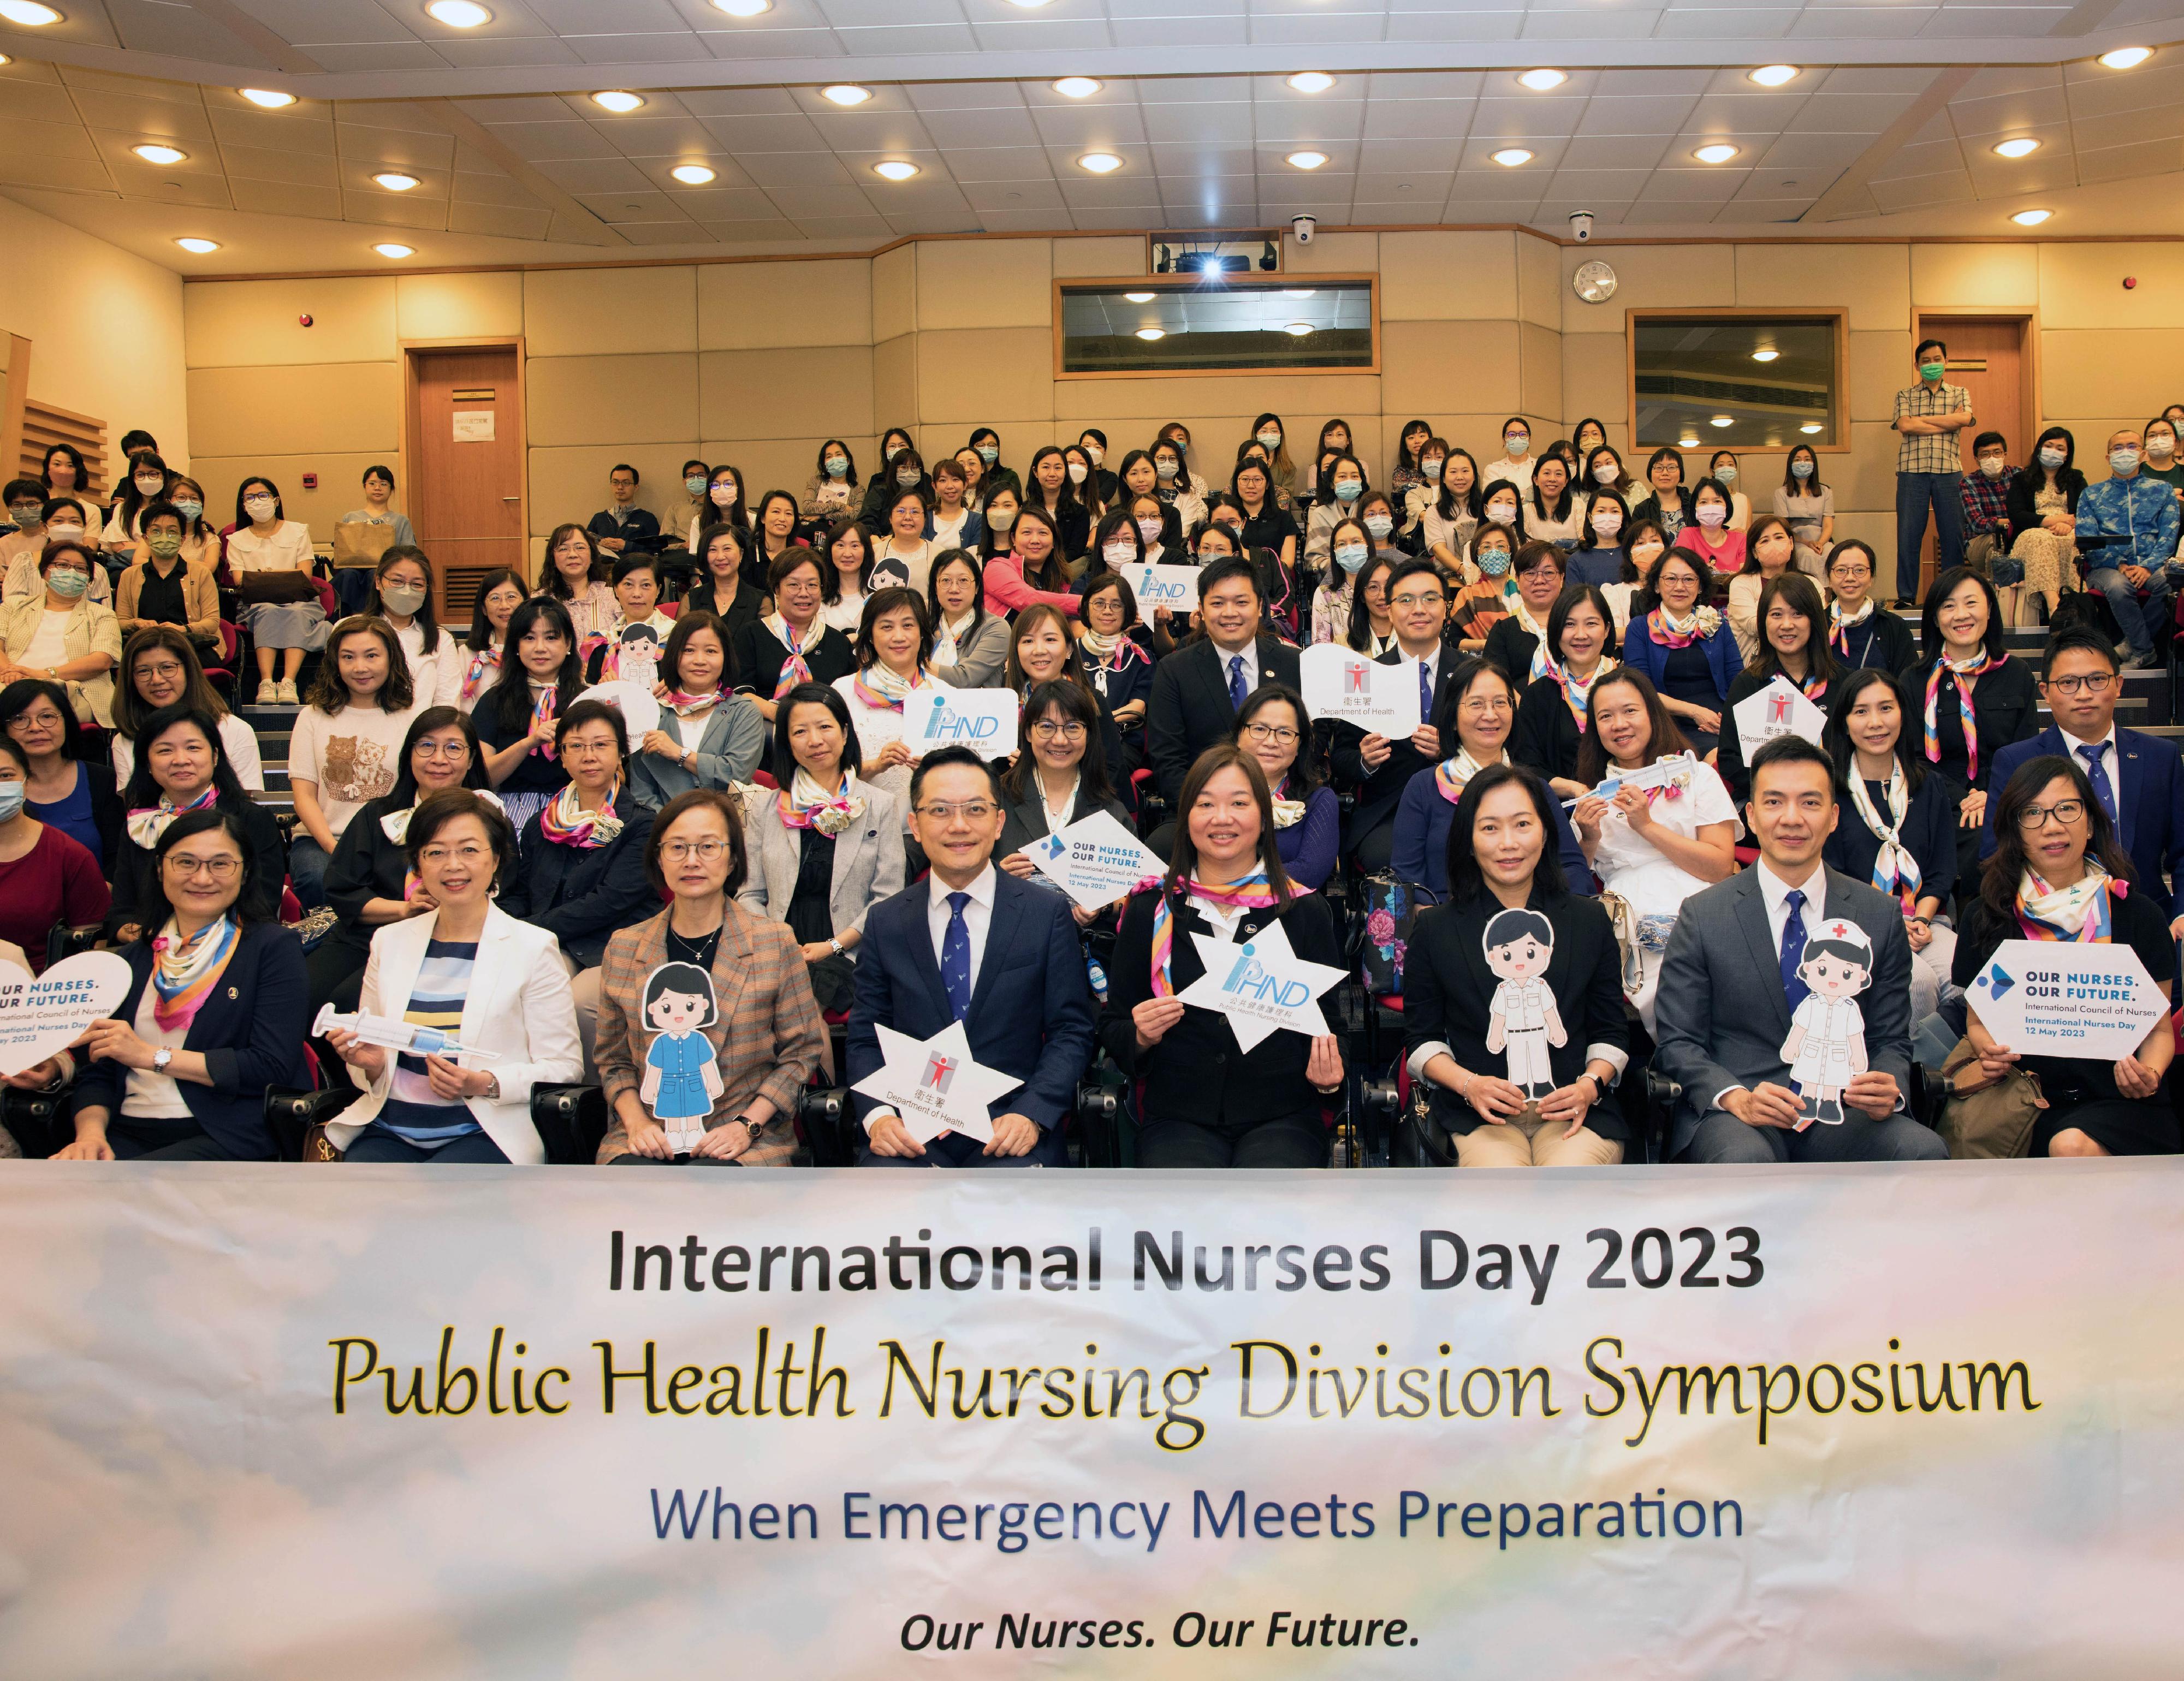 To echo the International Nurses Day 2023, which is being celebrated today (May 12), the Department of Health (DH) has organised various activities, including a thematic symposium held on May 6. The management of the DH, including the Director of Health, Dr Ronald Lam (front row, fourth left); the Controller of Regulatory Affairs of the DH, Dr Amy Chiu (front row, third left); the Deputy Director of Health, Dr Teresa Li (front row, third right); the Assistant Director (Health Administration and Planning), Dr Jackie Leung (front row, second left); the Assistant Director (Chinese Medicine), Dr Edmund Fong (front row, second right); and the Principal Nursing Officer, Ms Lucia Ko (front row, fourth right), and public health nurses of the DH are pictured at the symposium.